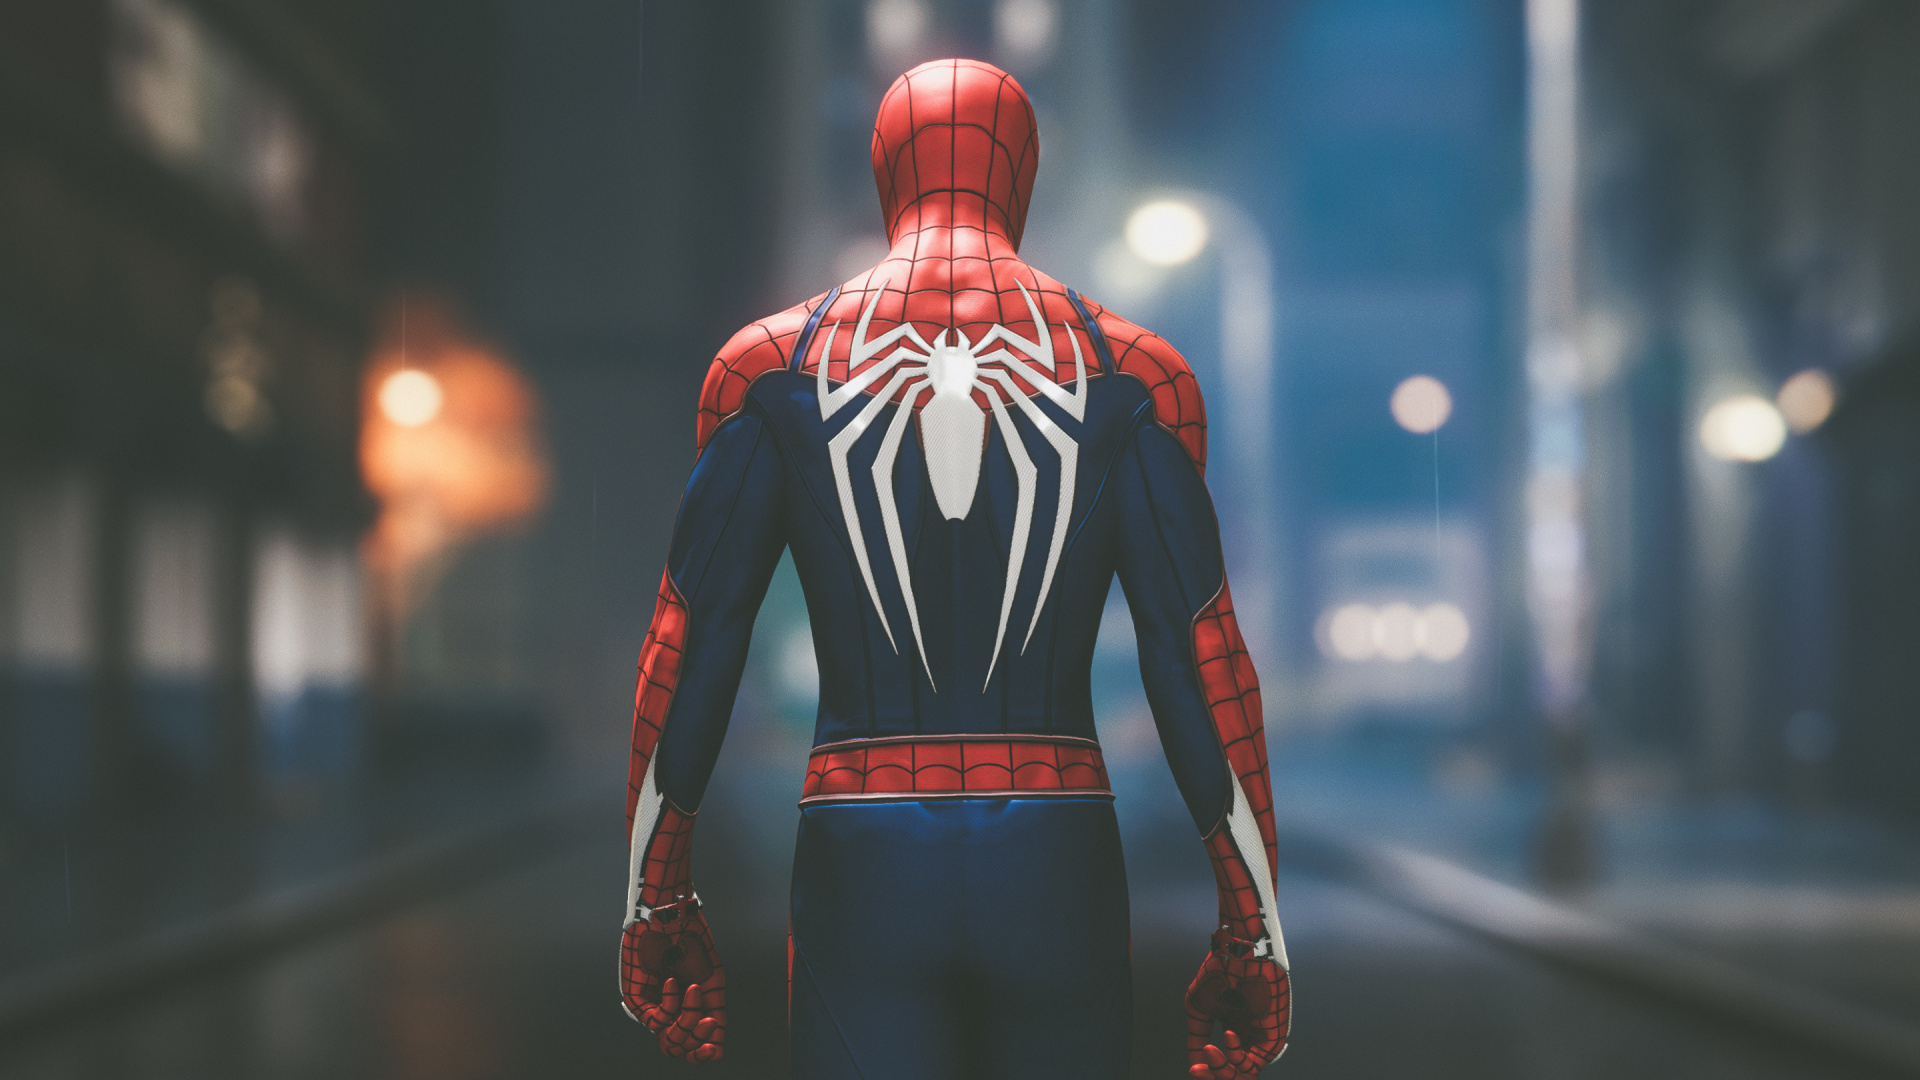 Spider-man, Superhero, Action Figure, Playstation 4, Fictional Character. Wallpaper in 1920x1080 Resolution